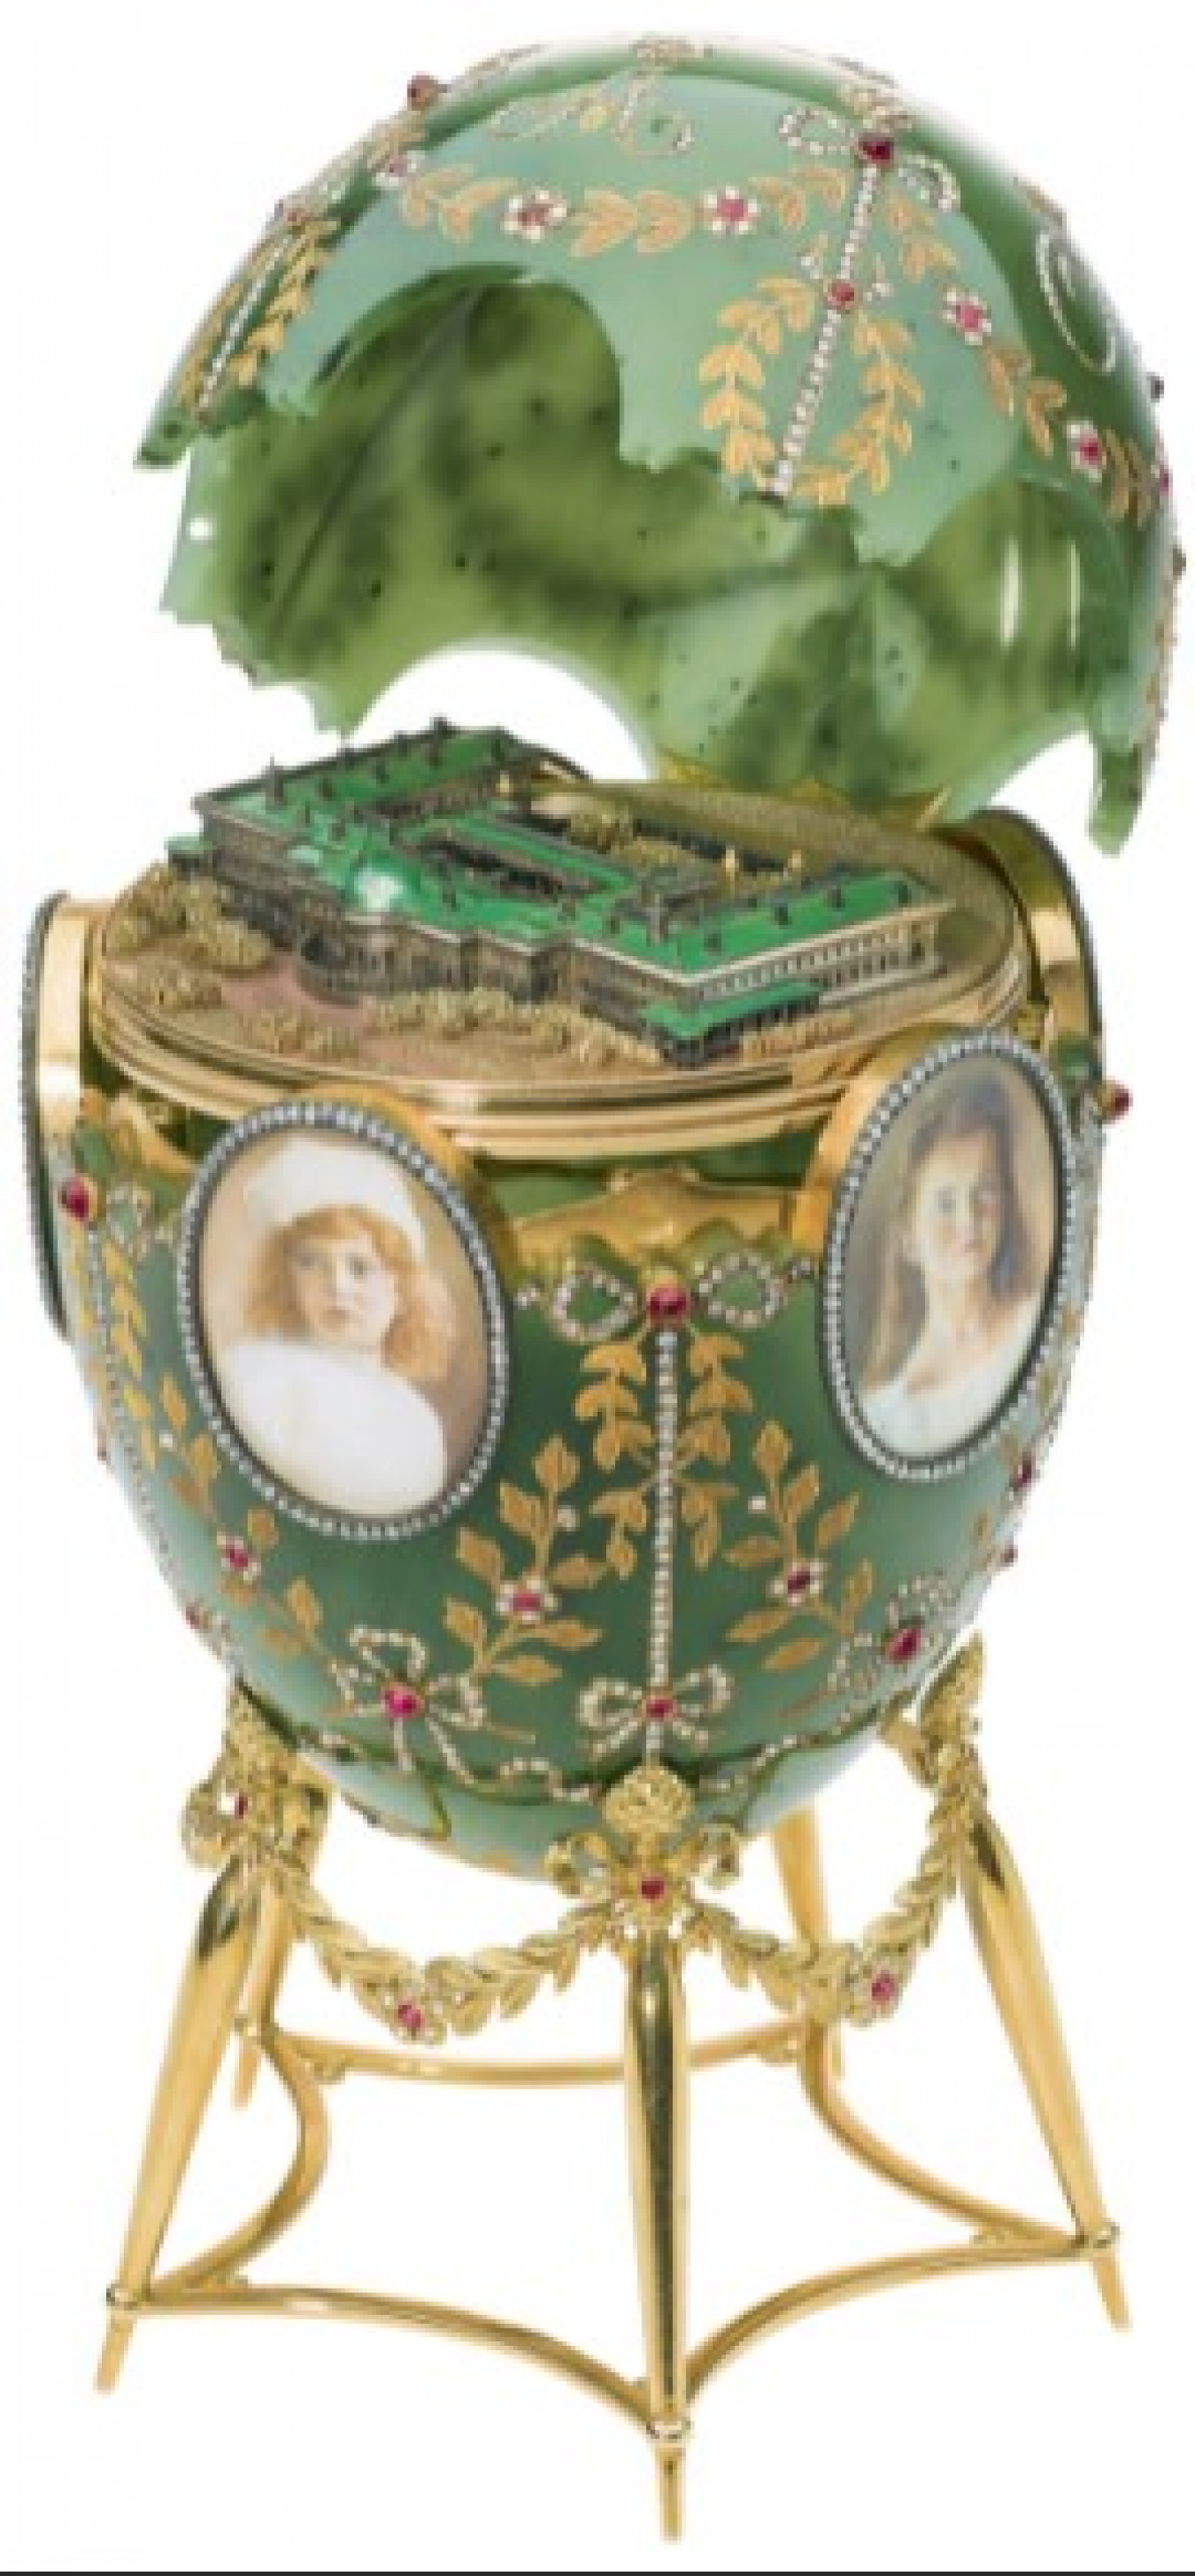 
					The Alexander Palace Egg, by Fabergé, chief workmaster Henrik Wigstrom, 1908. 					 					© The Moscow Kremlin Museums				